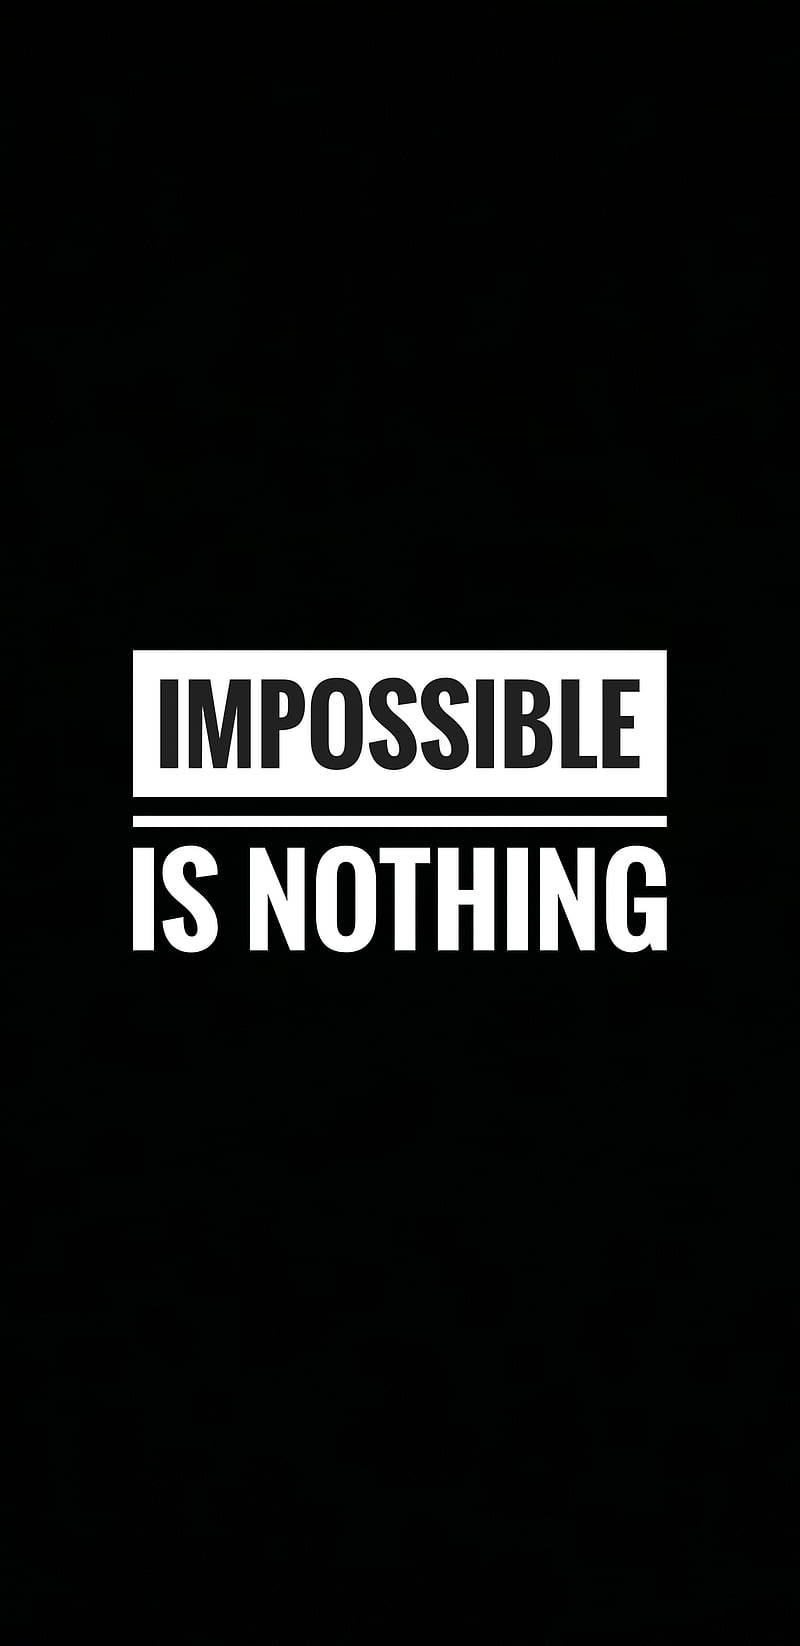 Inspiration in Monochrome - 'Impossible is Nothing' Quote Wallpaper